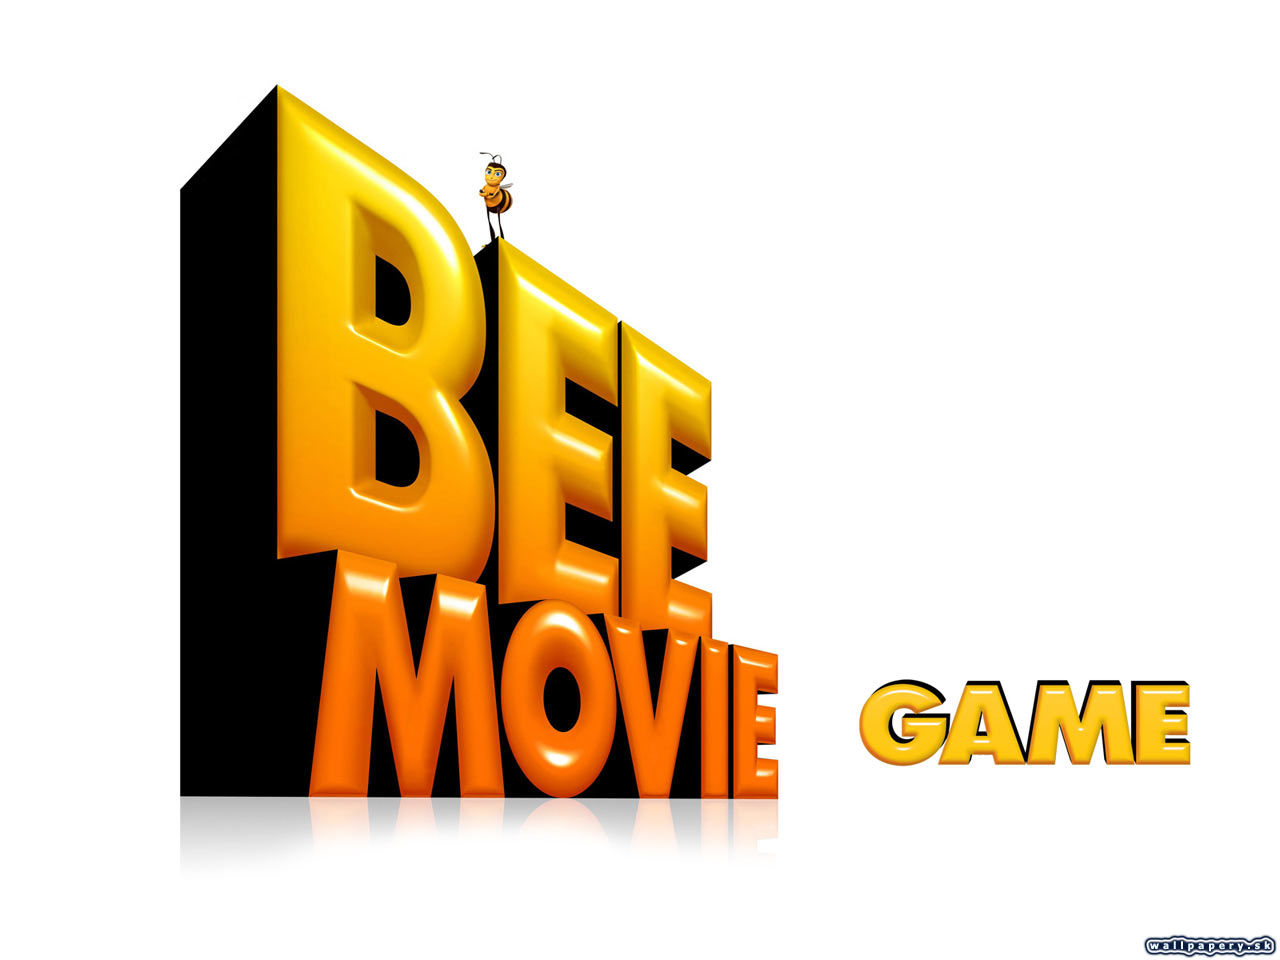 Bee Movie Game - wallpaper 11